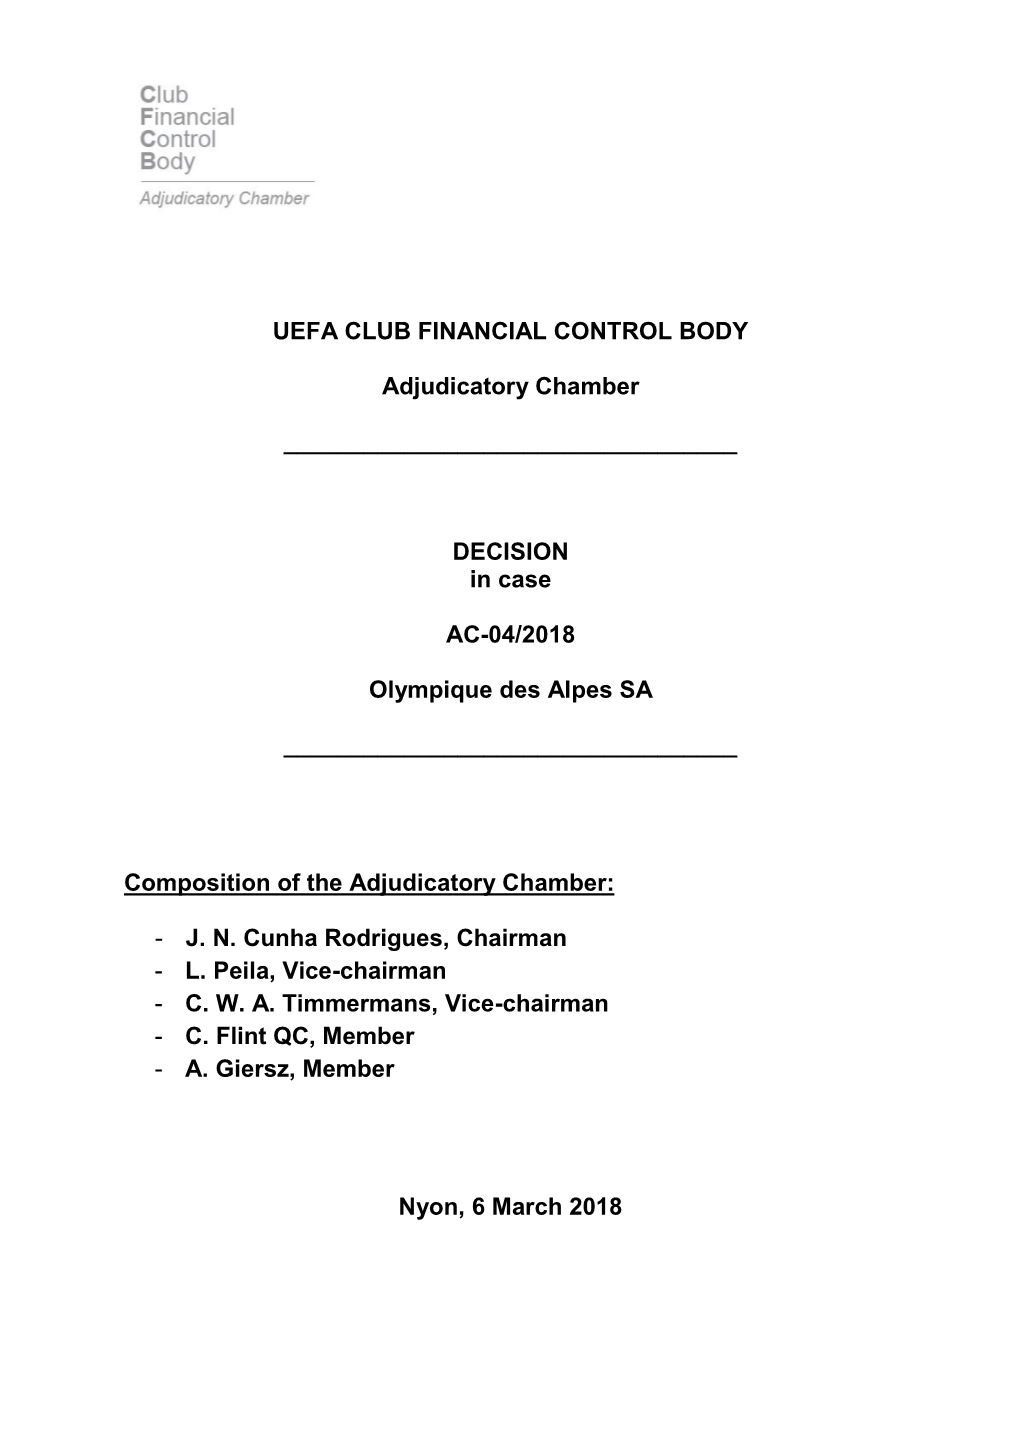 FC Sion” Or the “Club”) to the CFCB Adjudicatory Chamber